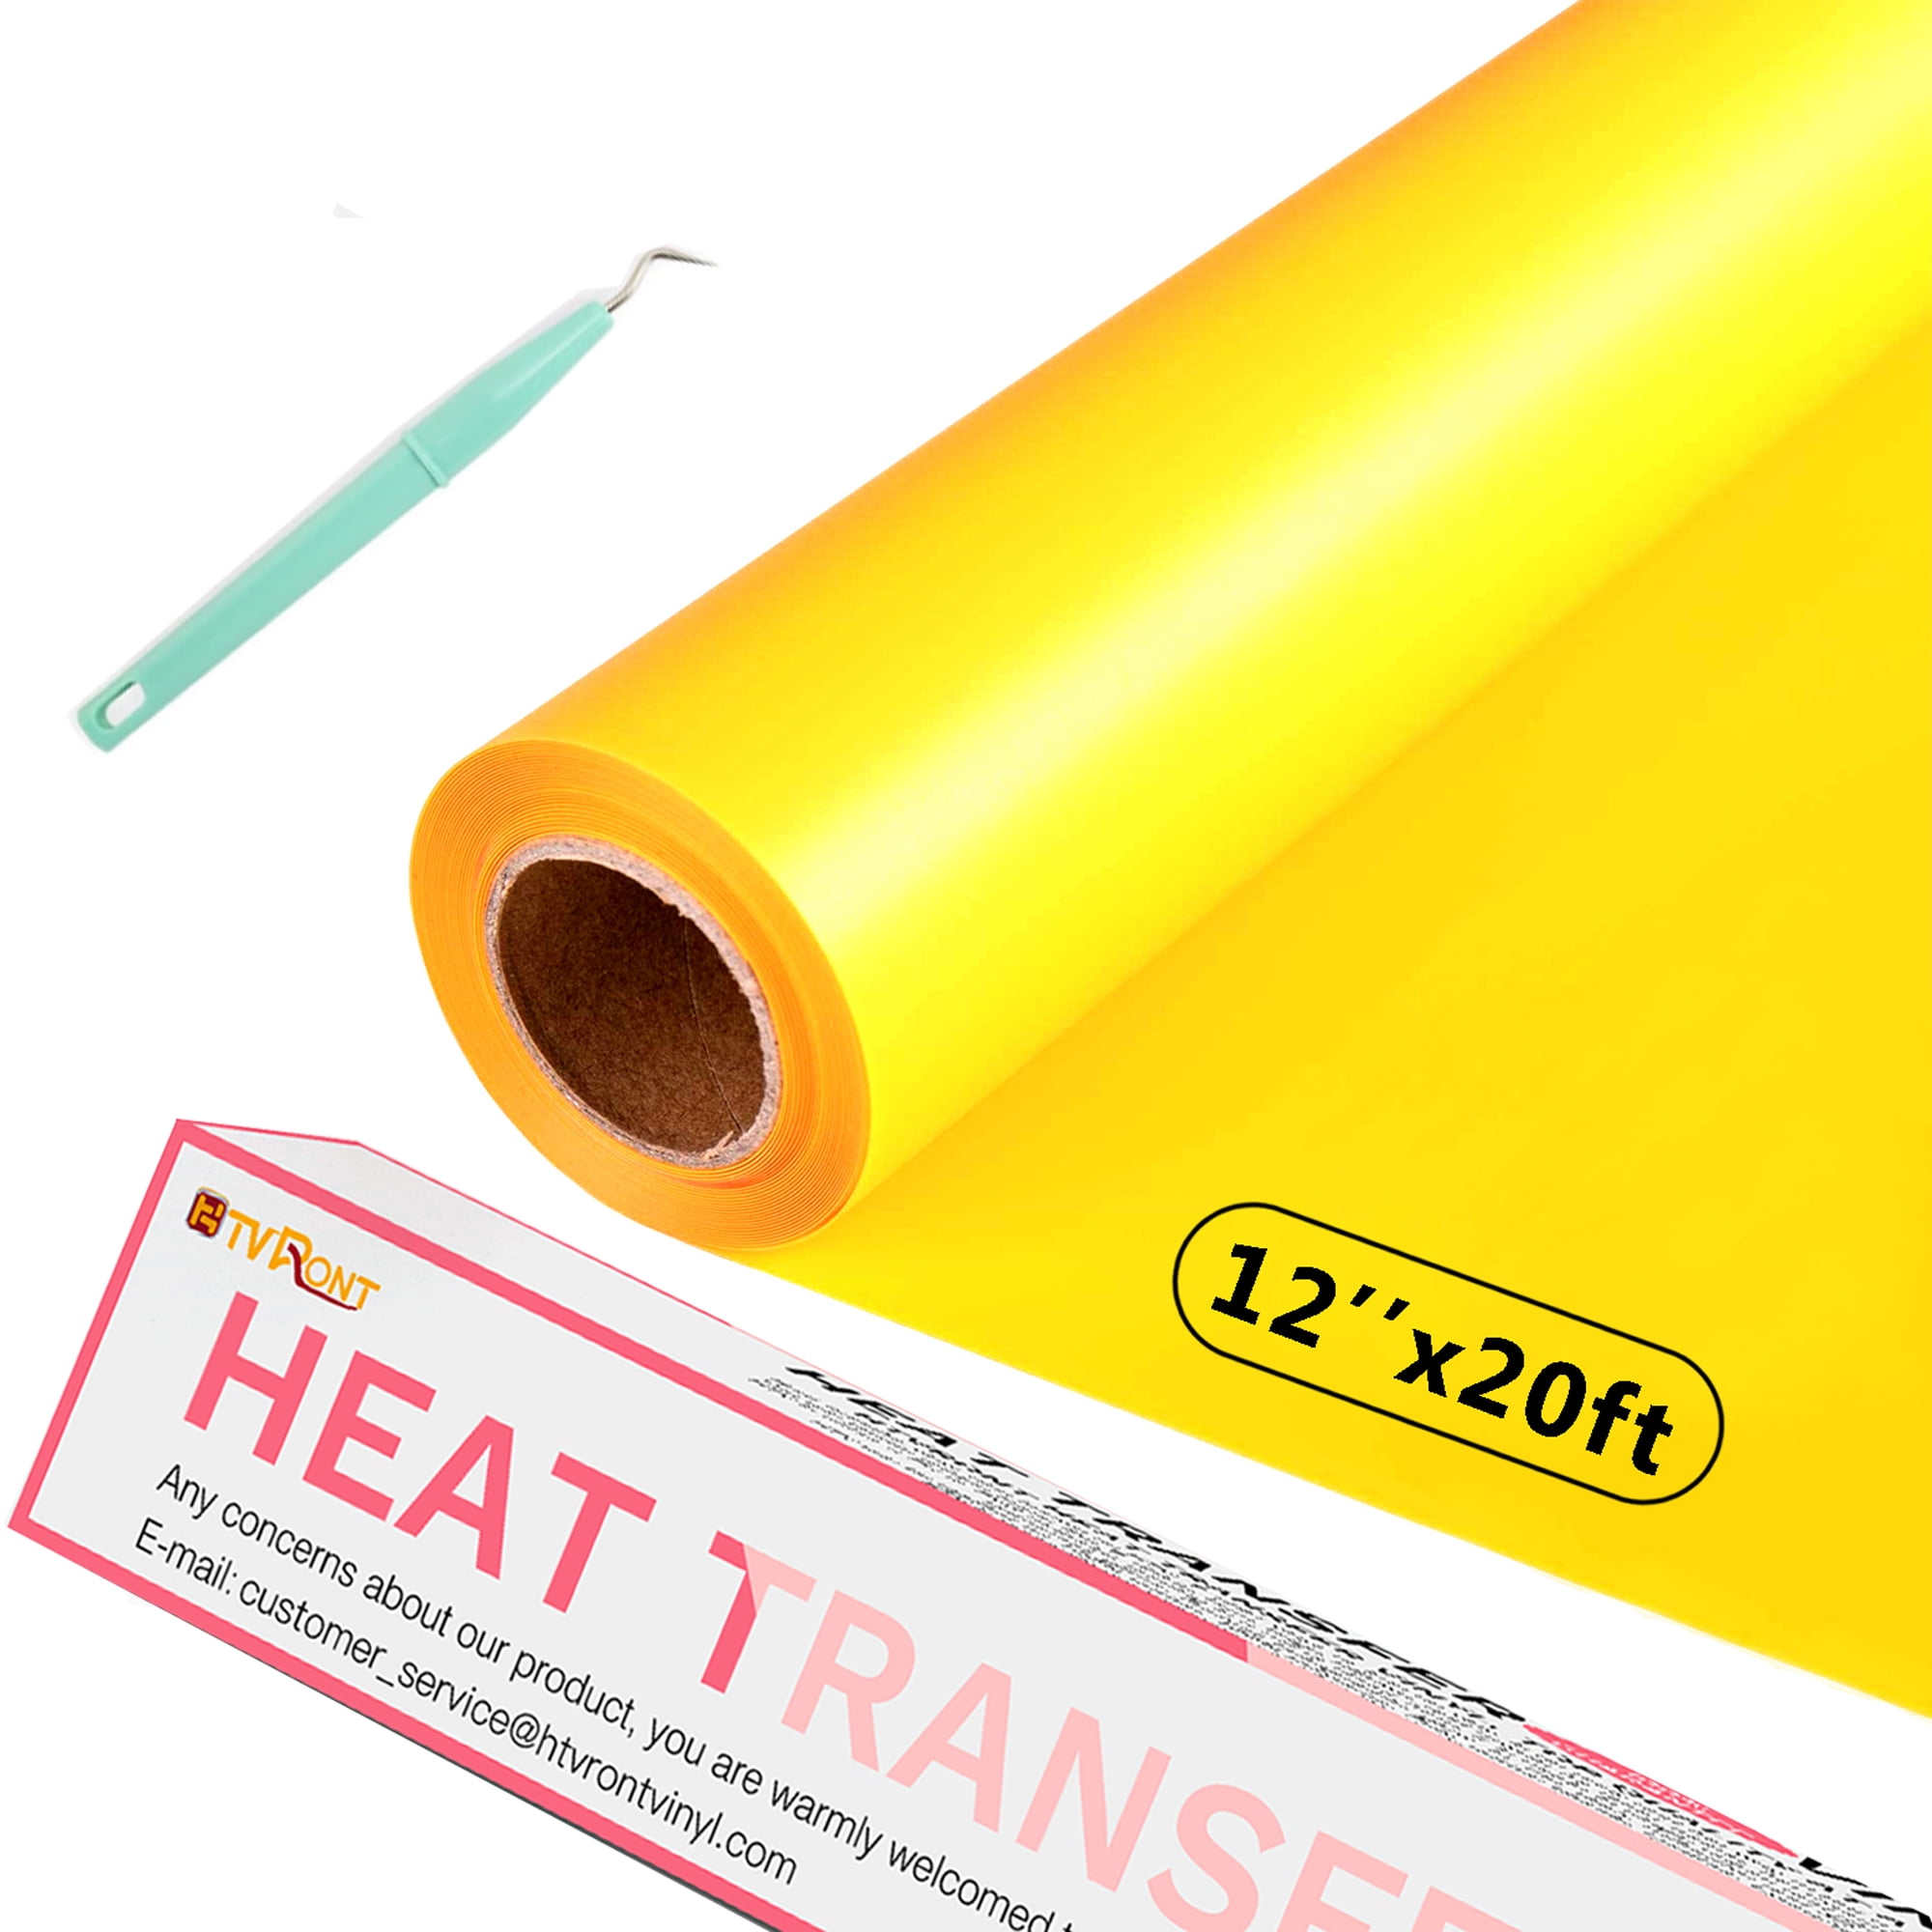 A-SUB HTV Rolls Yellow 12 x 20ft Iron on Heat Transfer Vinyl for Transfer  T-Shirts, Compatible with Cricut Heat Press